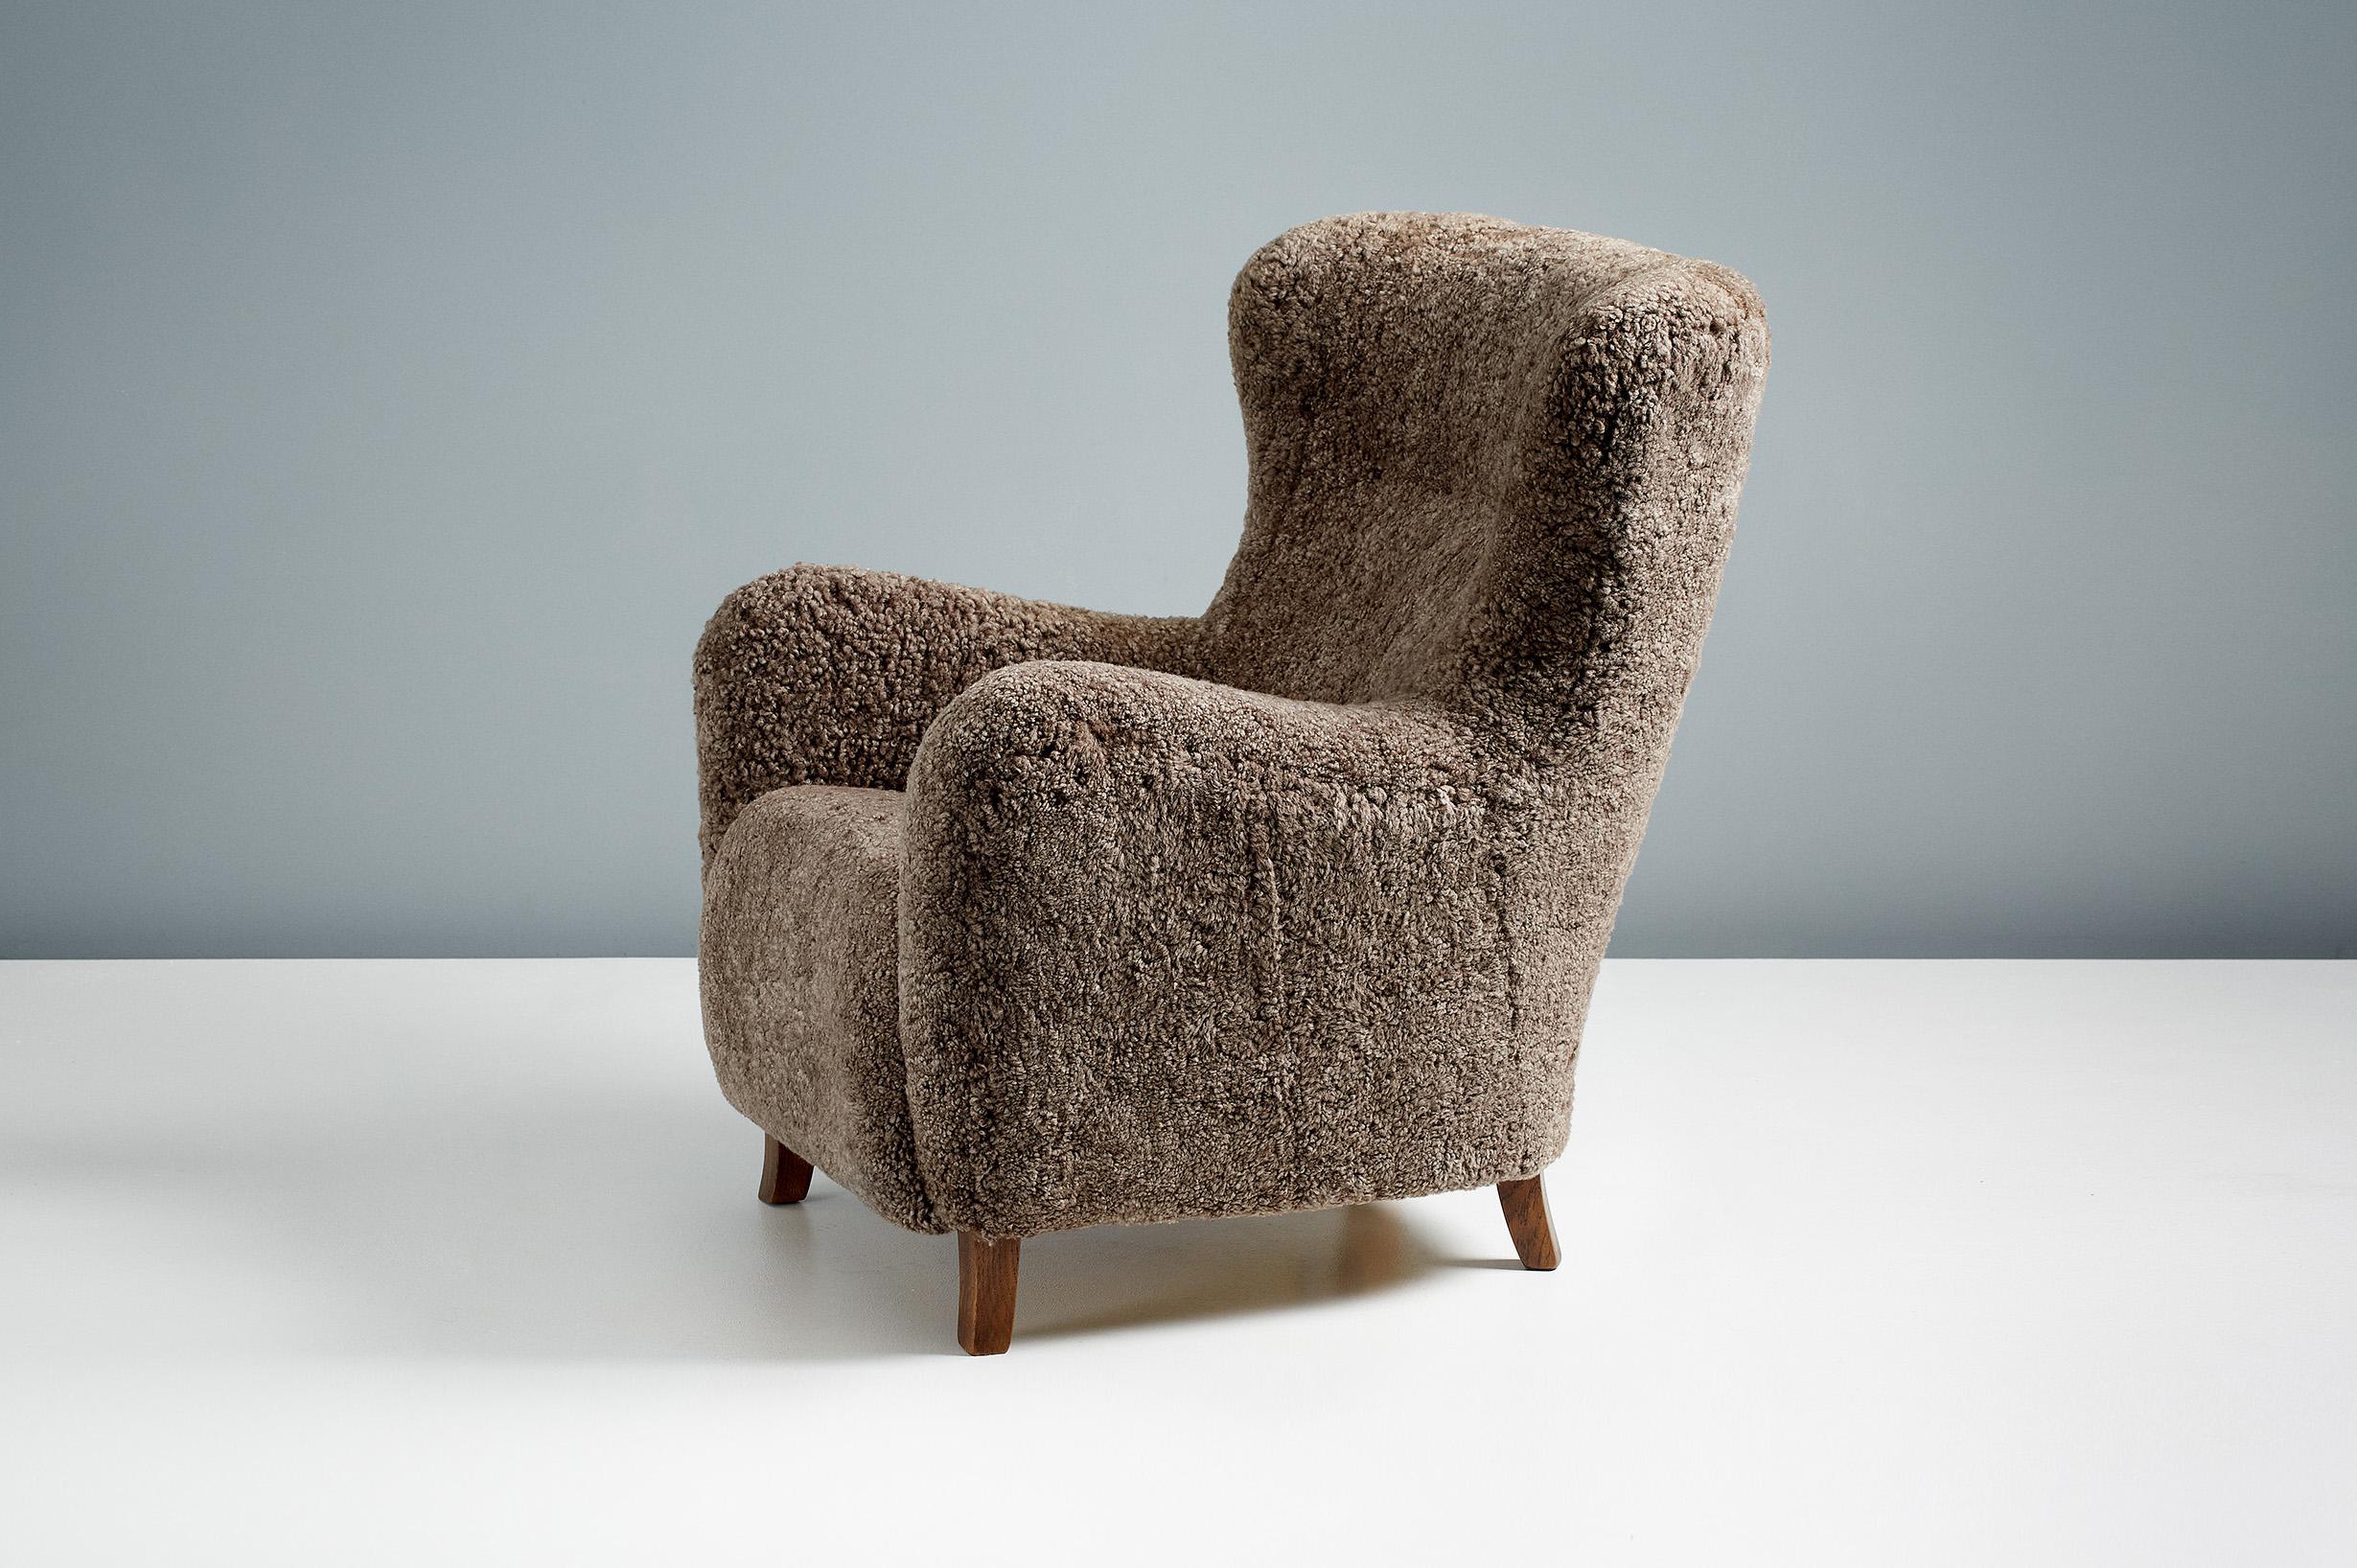 Dagmar - Sampo Wing Chair & Ottoman

A custom-made wing chair and ottoman developed & produced at our workshops in London using the highest quality materials. The frame is built from solid beechwood with a sprung seat. The Sampo chair is available